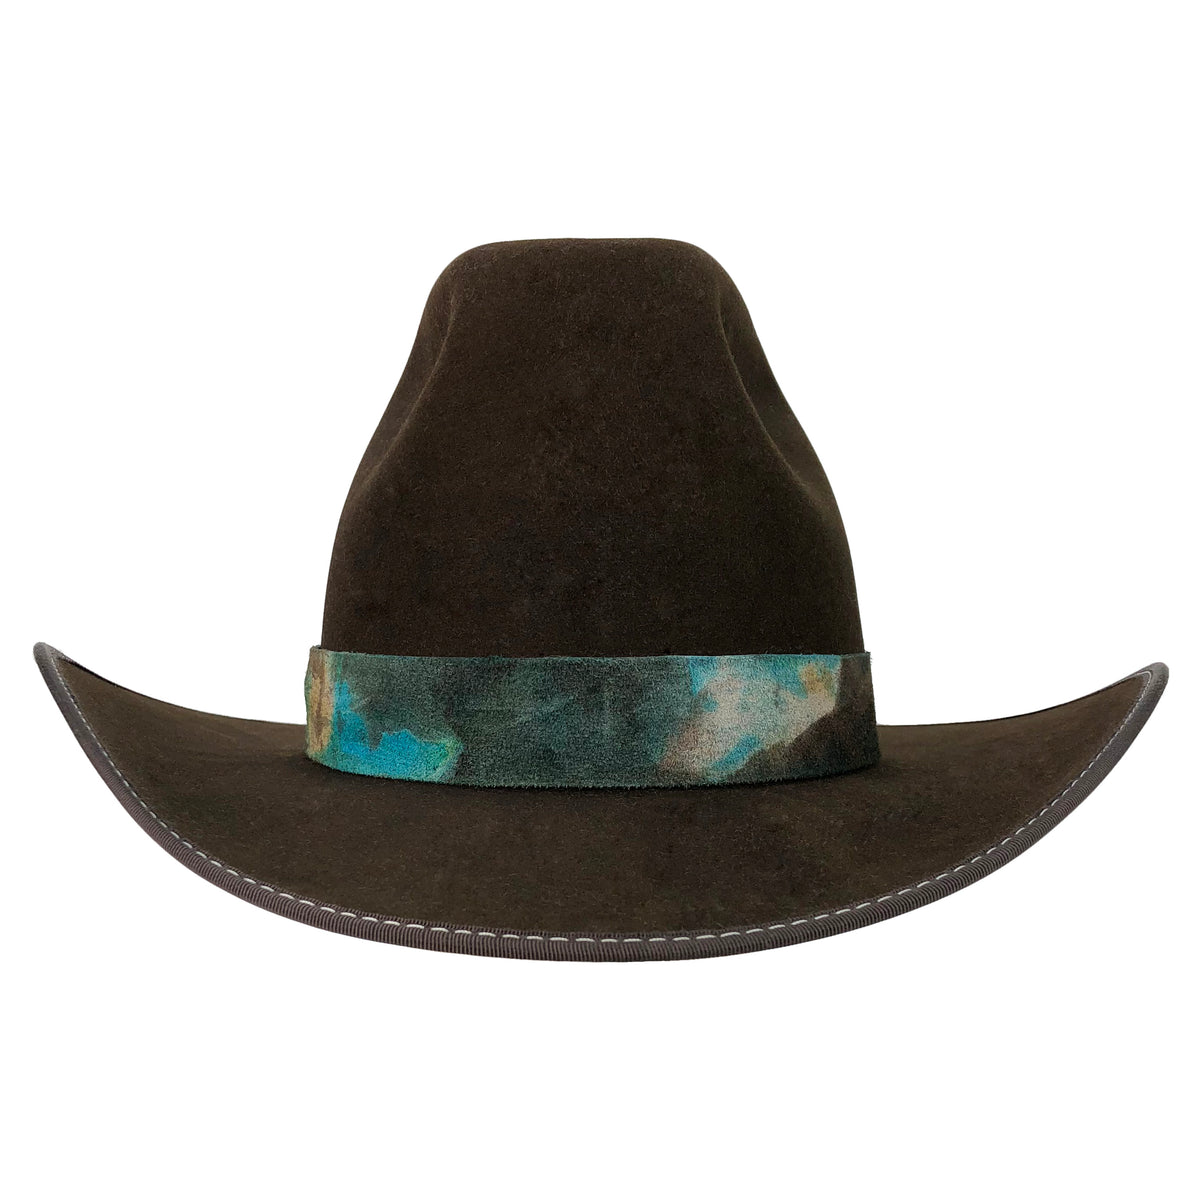 cattleman crease crown  with 5 3/4" height